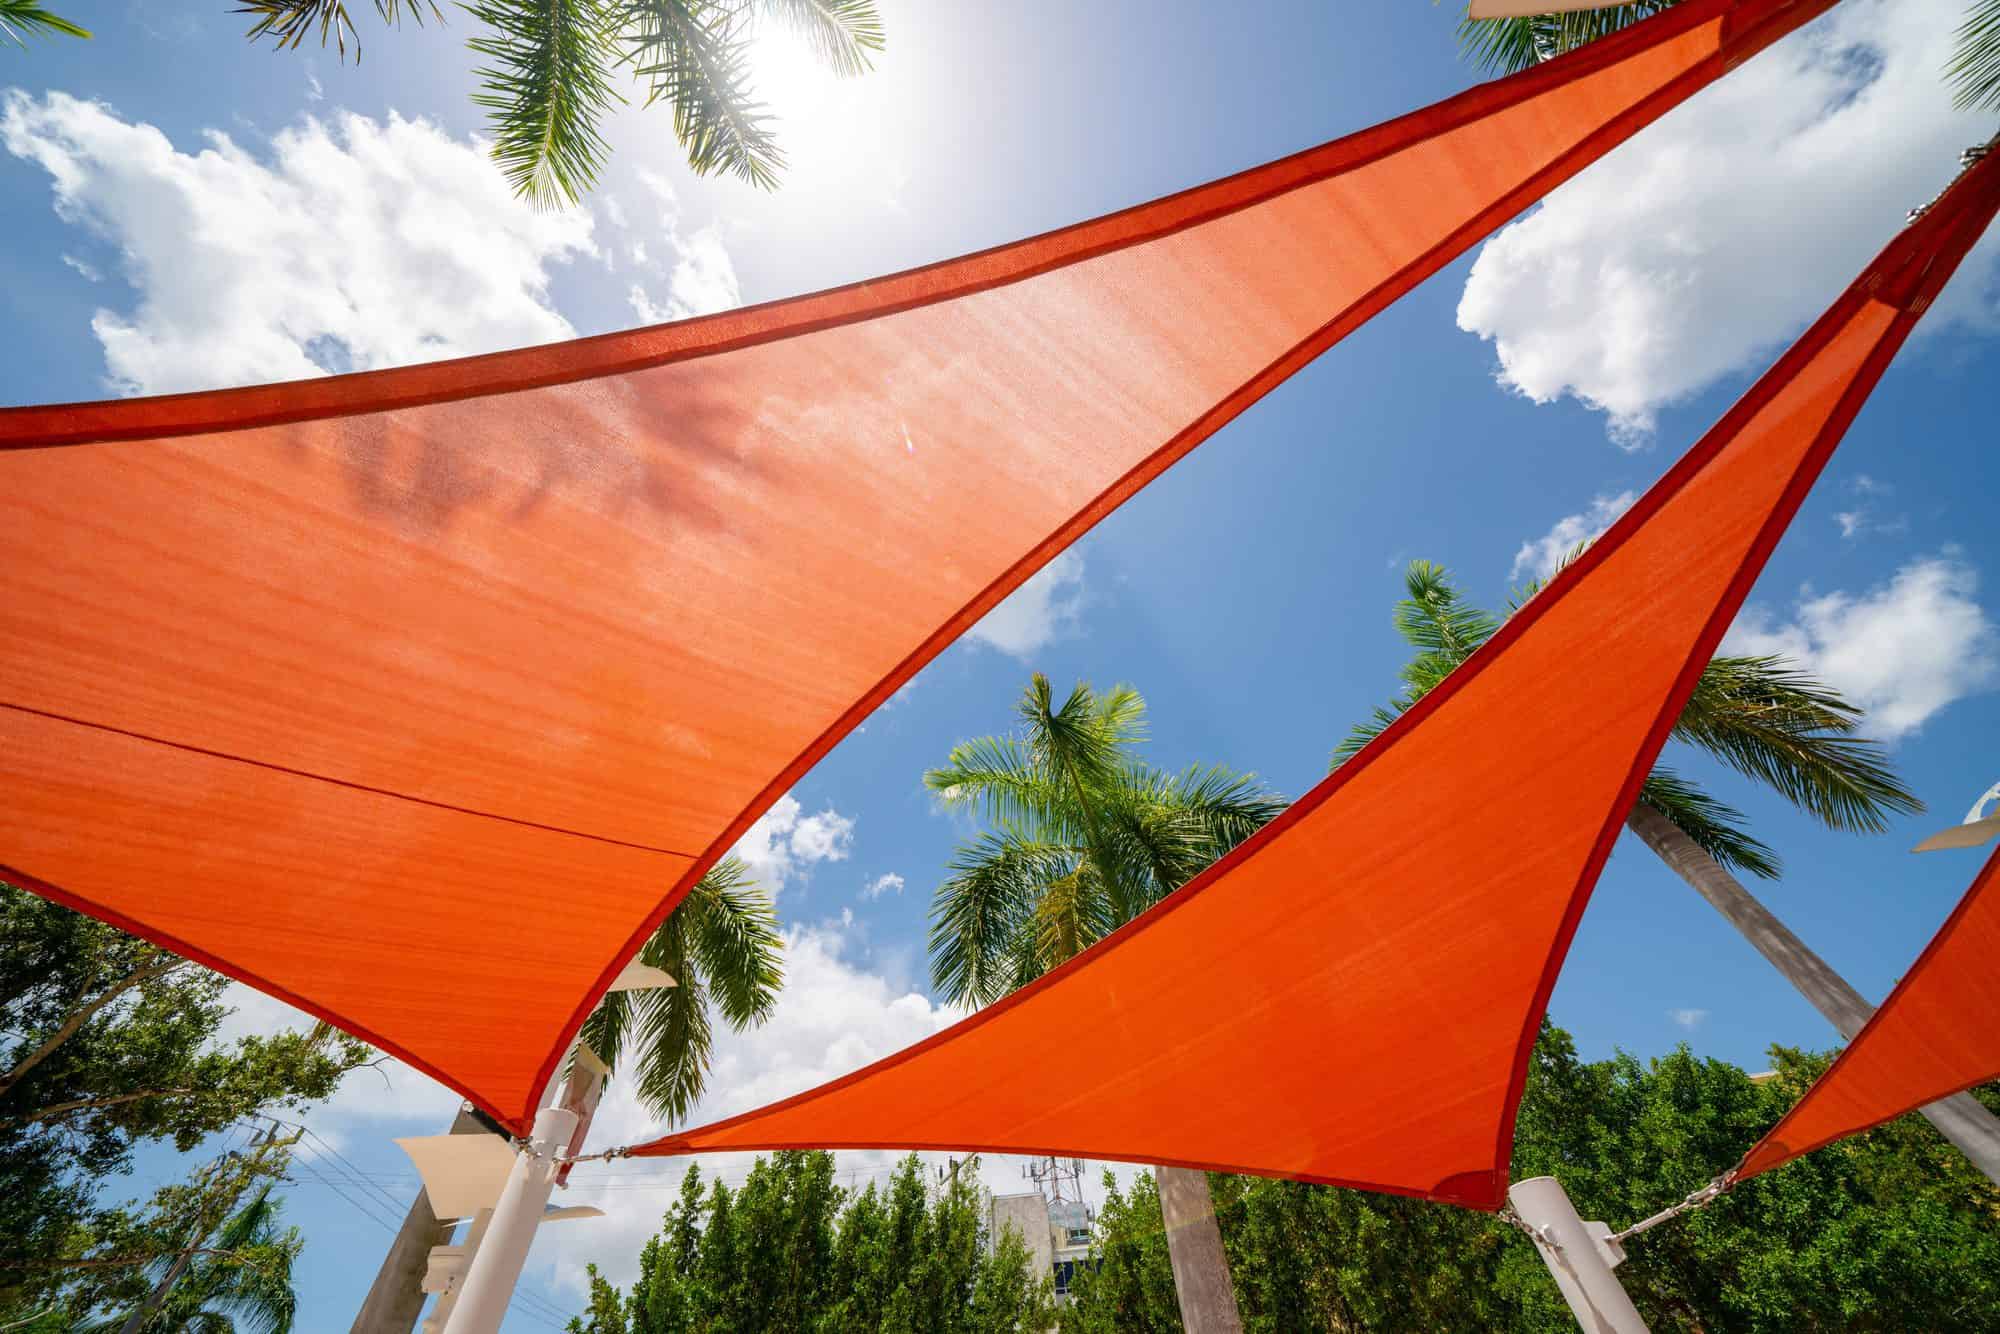 Orange colored sun shade in a park outdoors